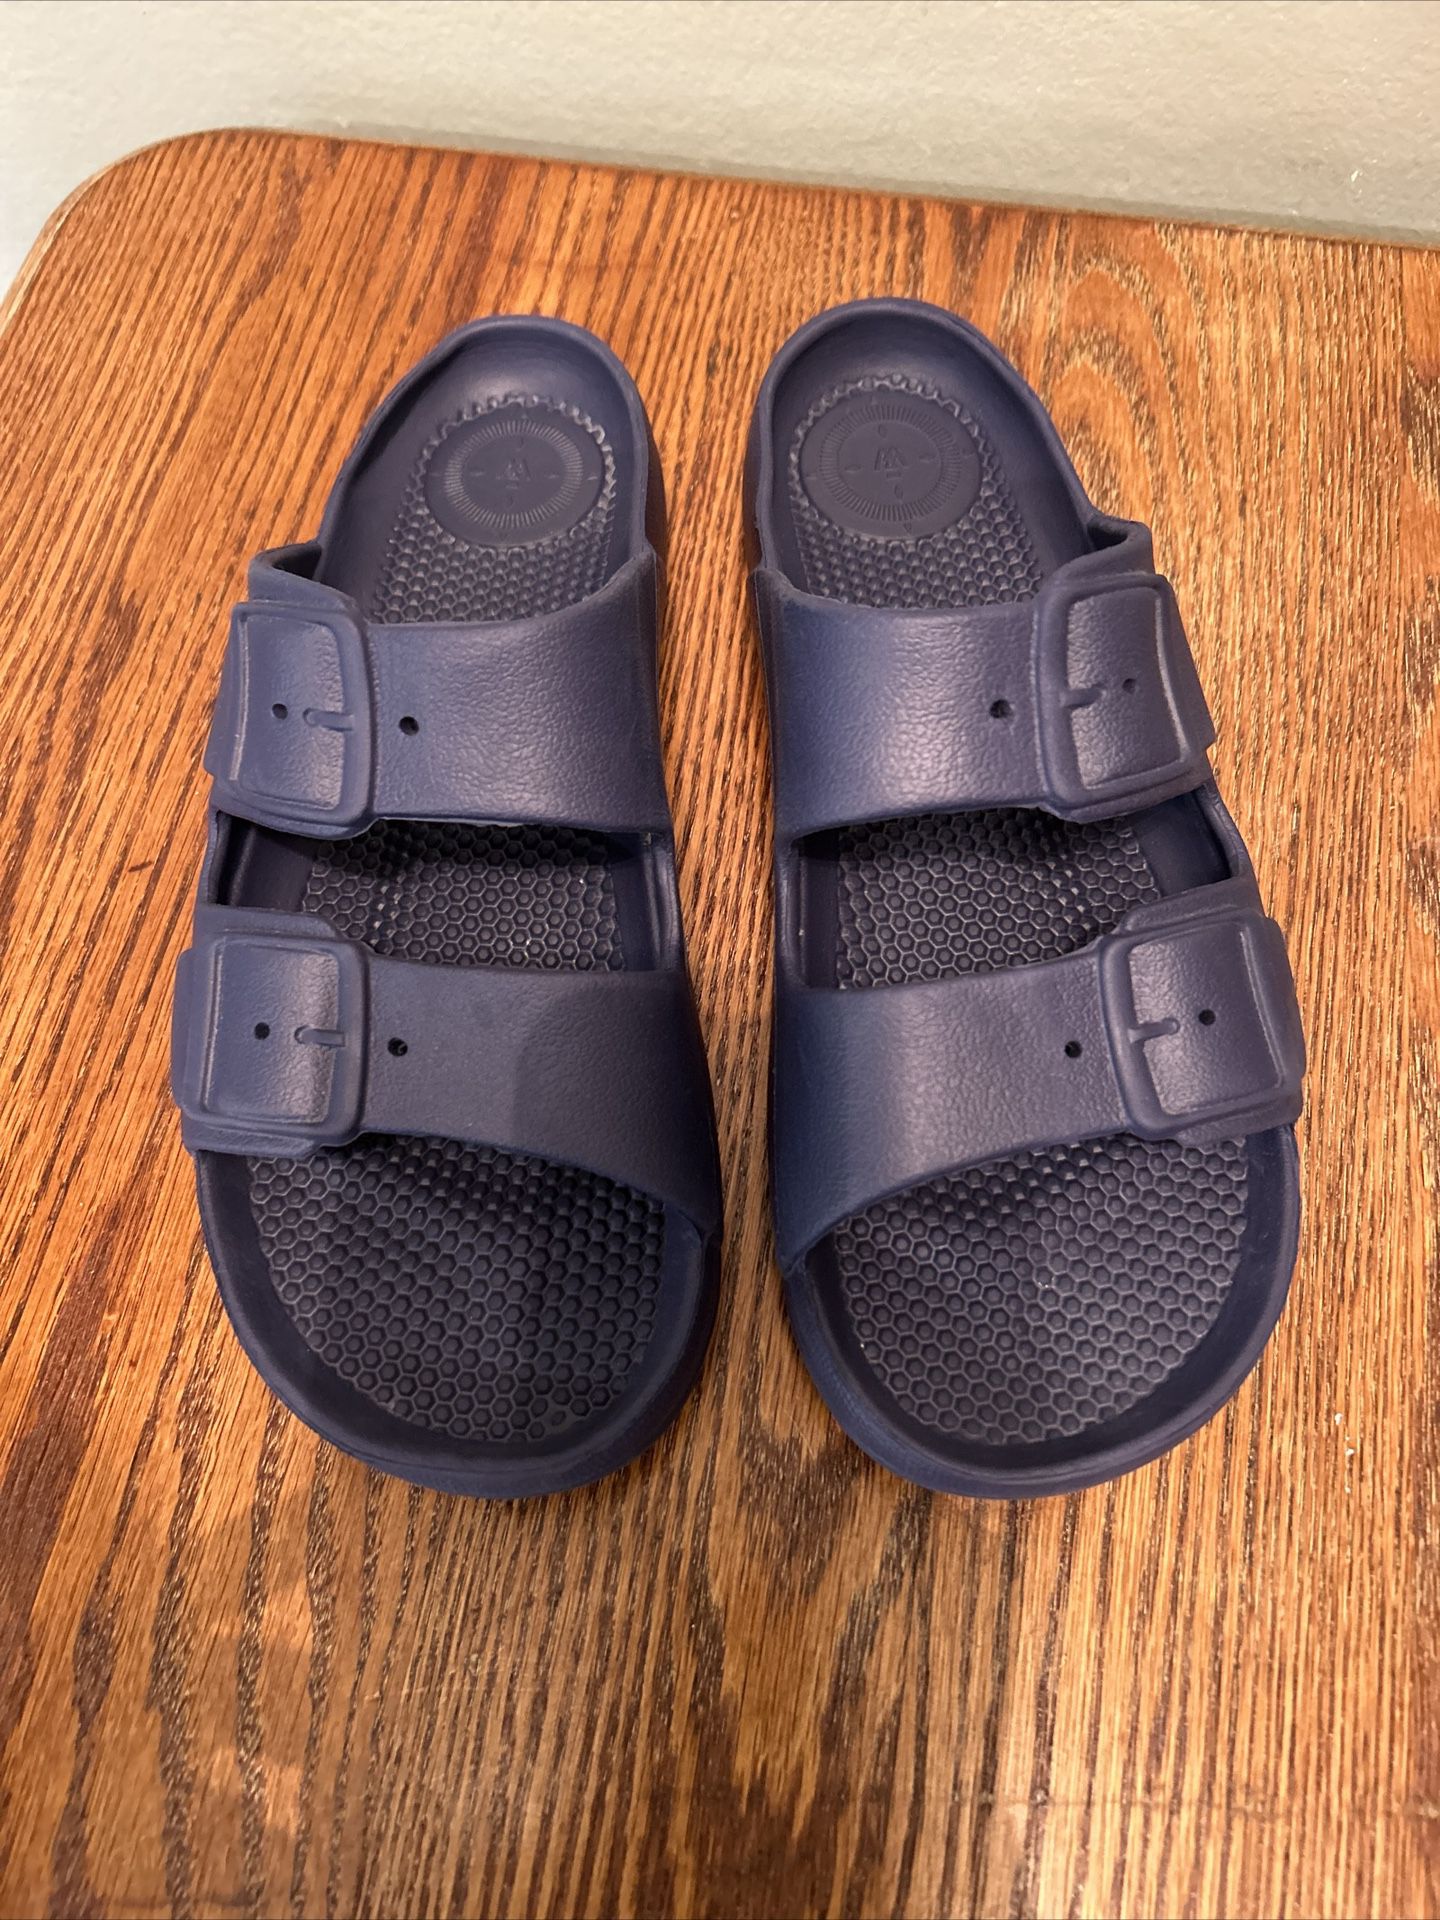 Totes Sandals - Women’s Size 8